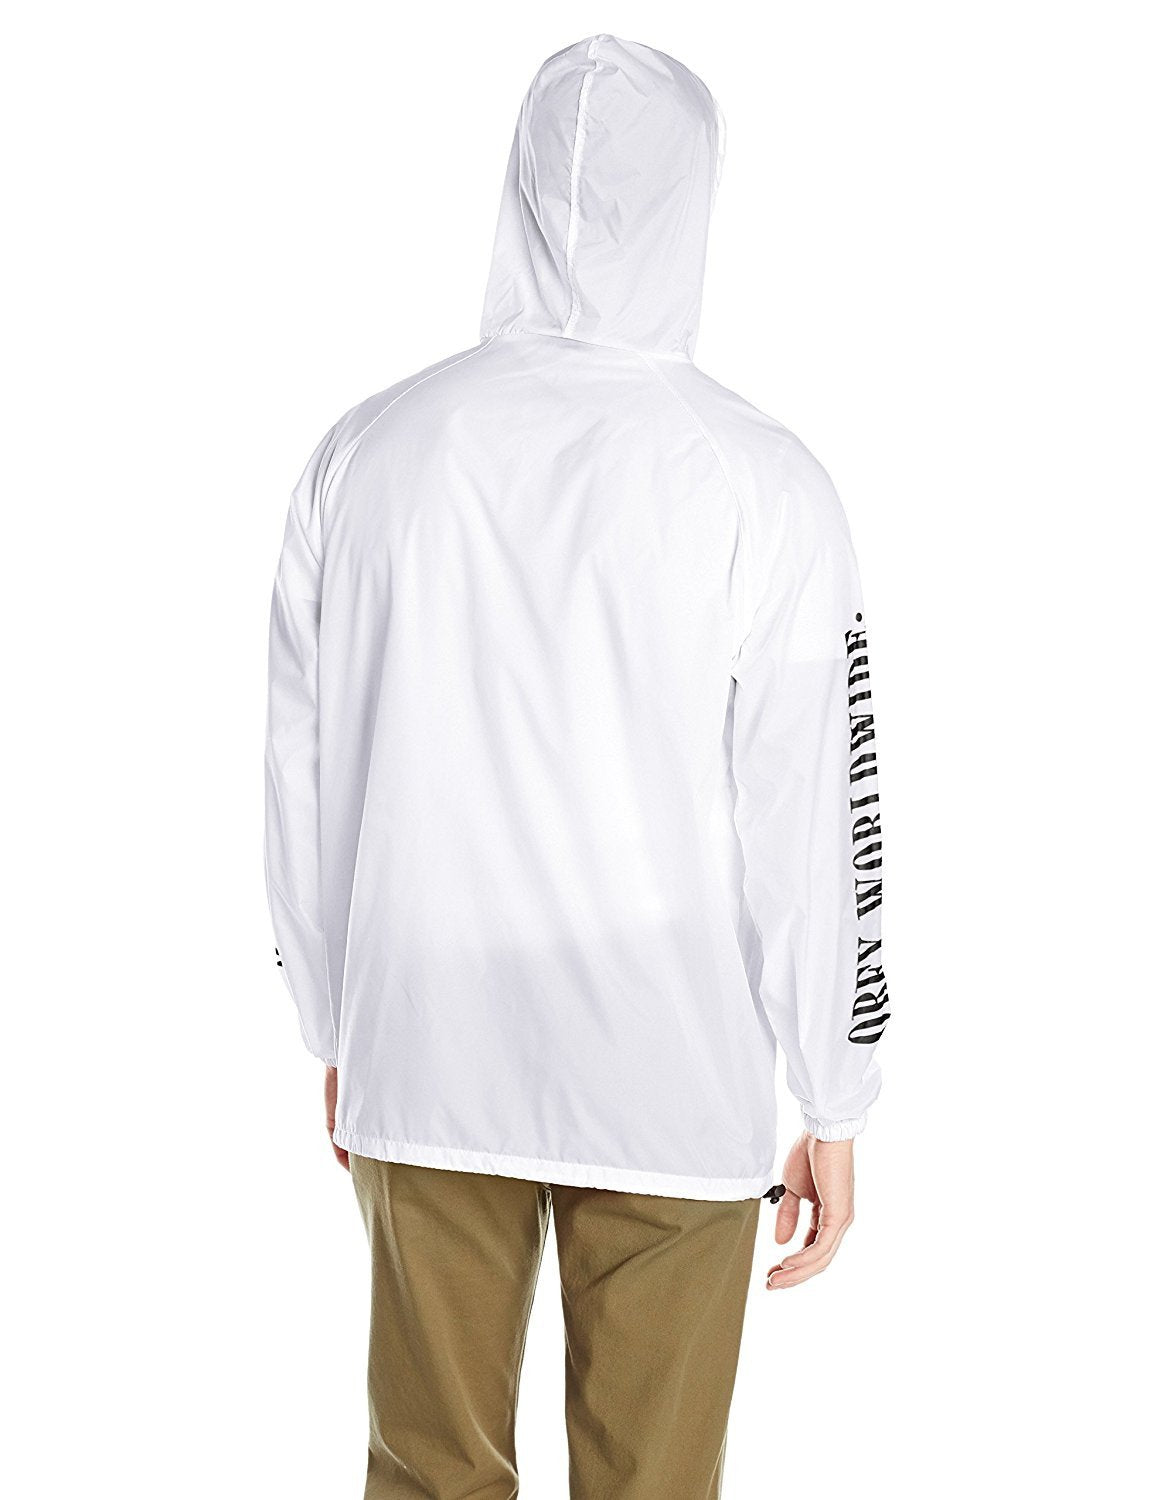 OBEY NEW TIMES WORLDWIDE ANORAK PULLOVER HOOD // WHITE-The Collateral